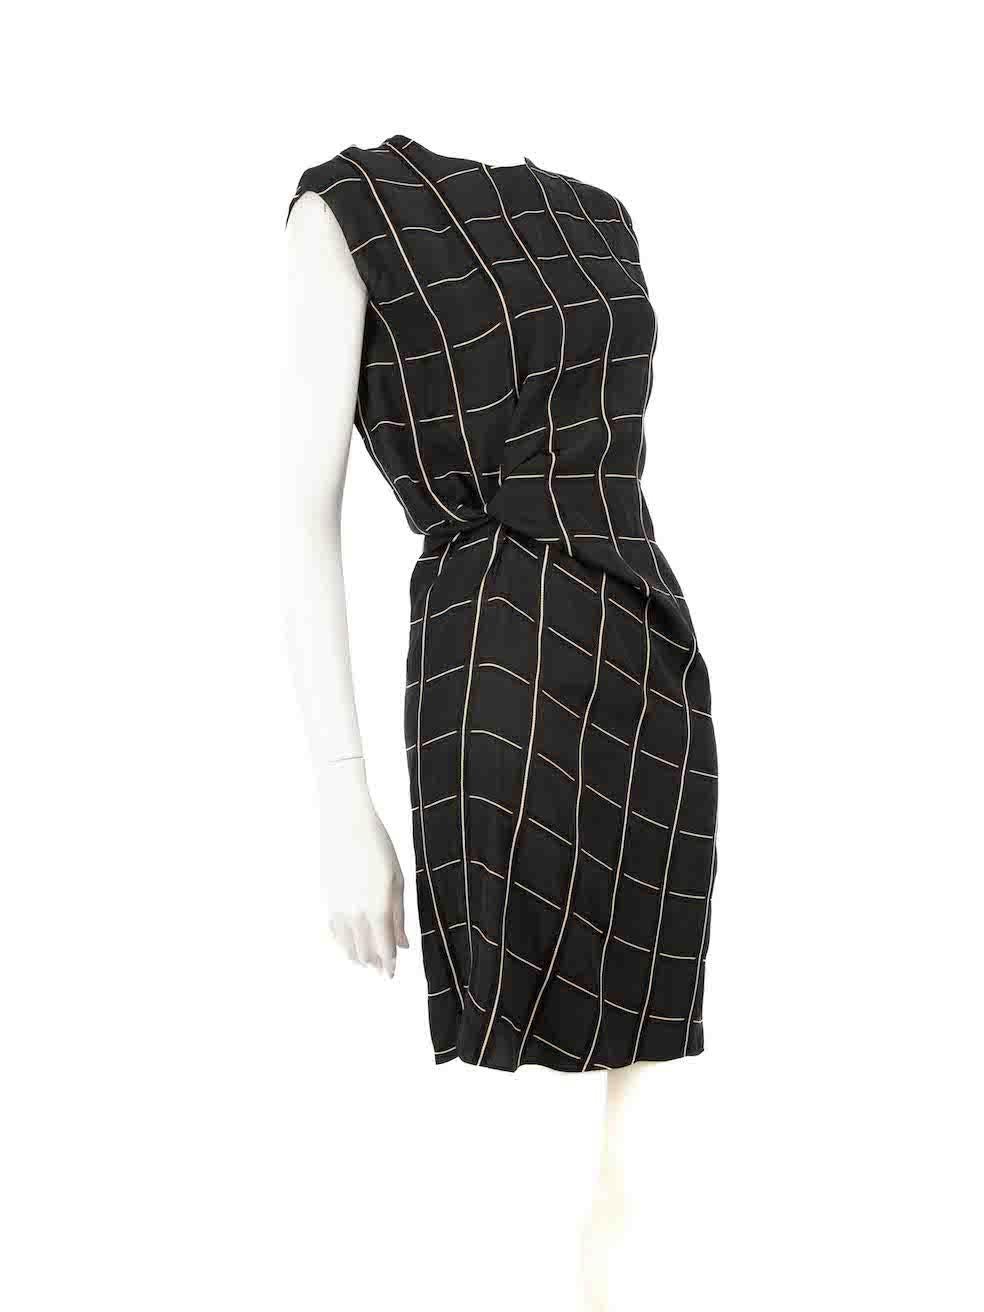 CONDITION is Very good. Hardly any visible wear to dress is evident on this used Lanvin designer resale item.
 
 Details
 Black
 Viscose
 Knee length dress
 Checkered pattern
 Round neckline
 Knot detail on waist
 Back zip closure with snap button
